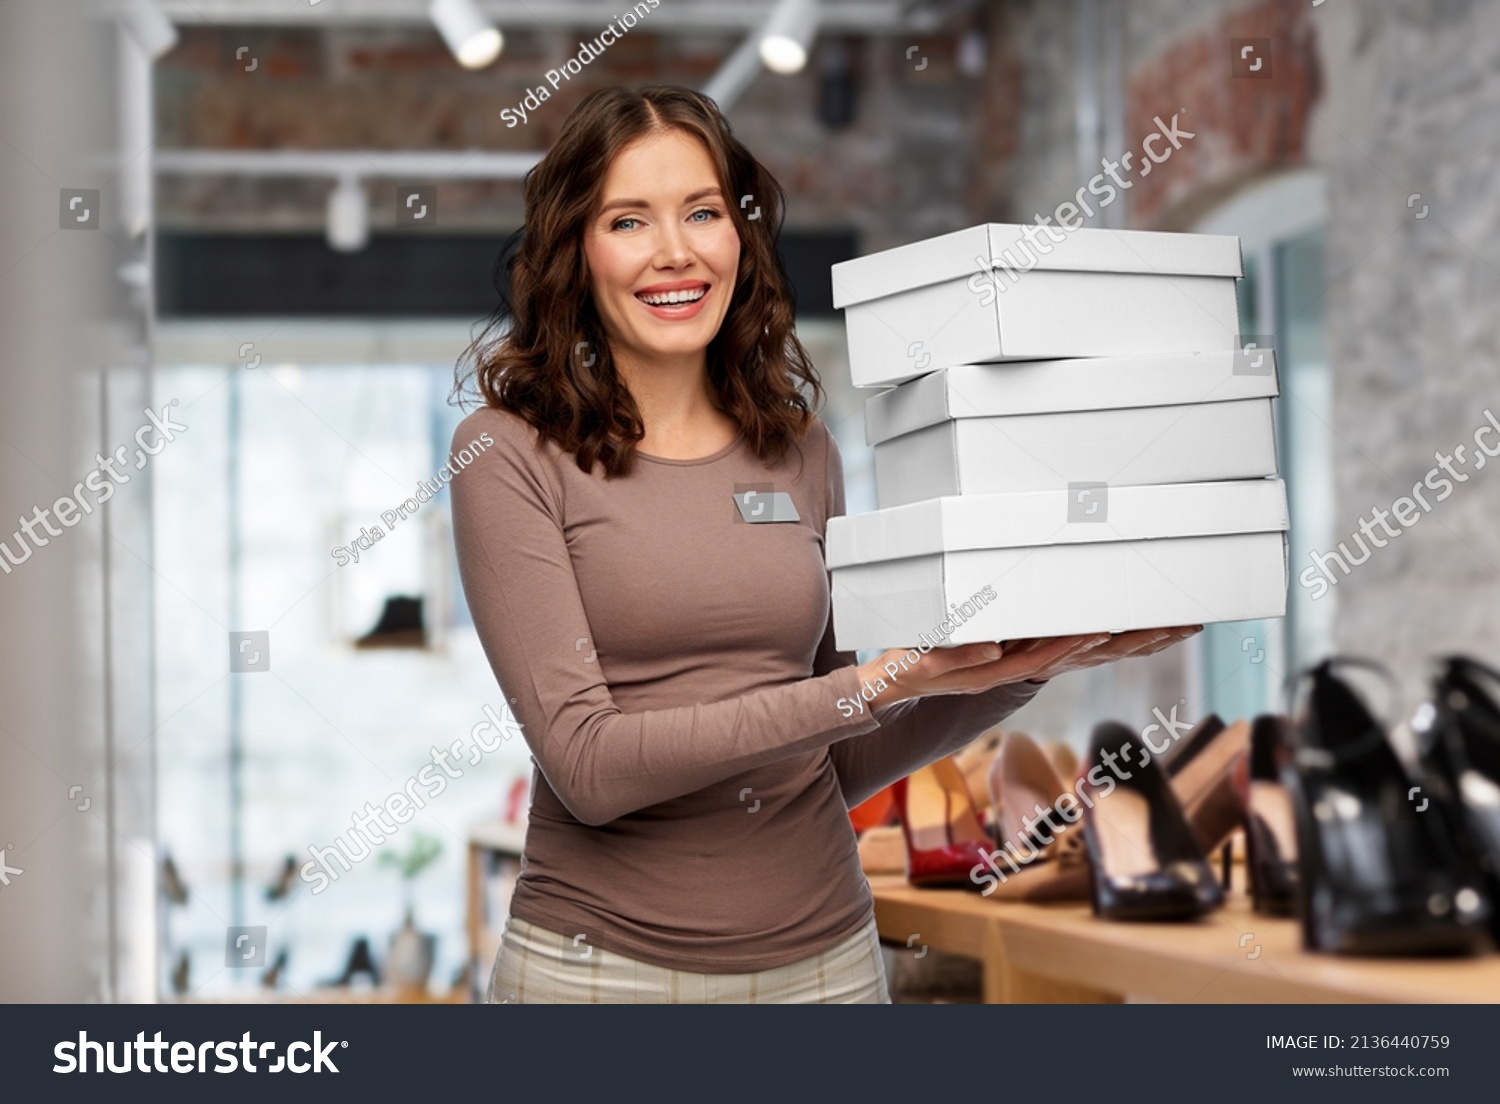 sale, shopping and business concept - happy female shop assistant or saleswoman holding three shoe boxes over store background #2136440759